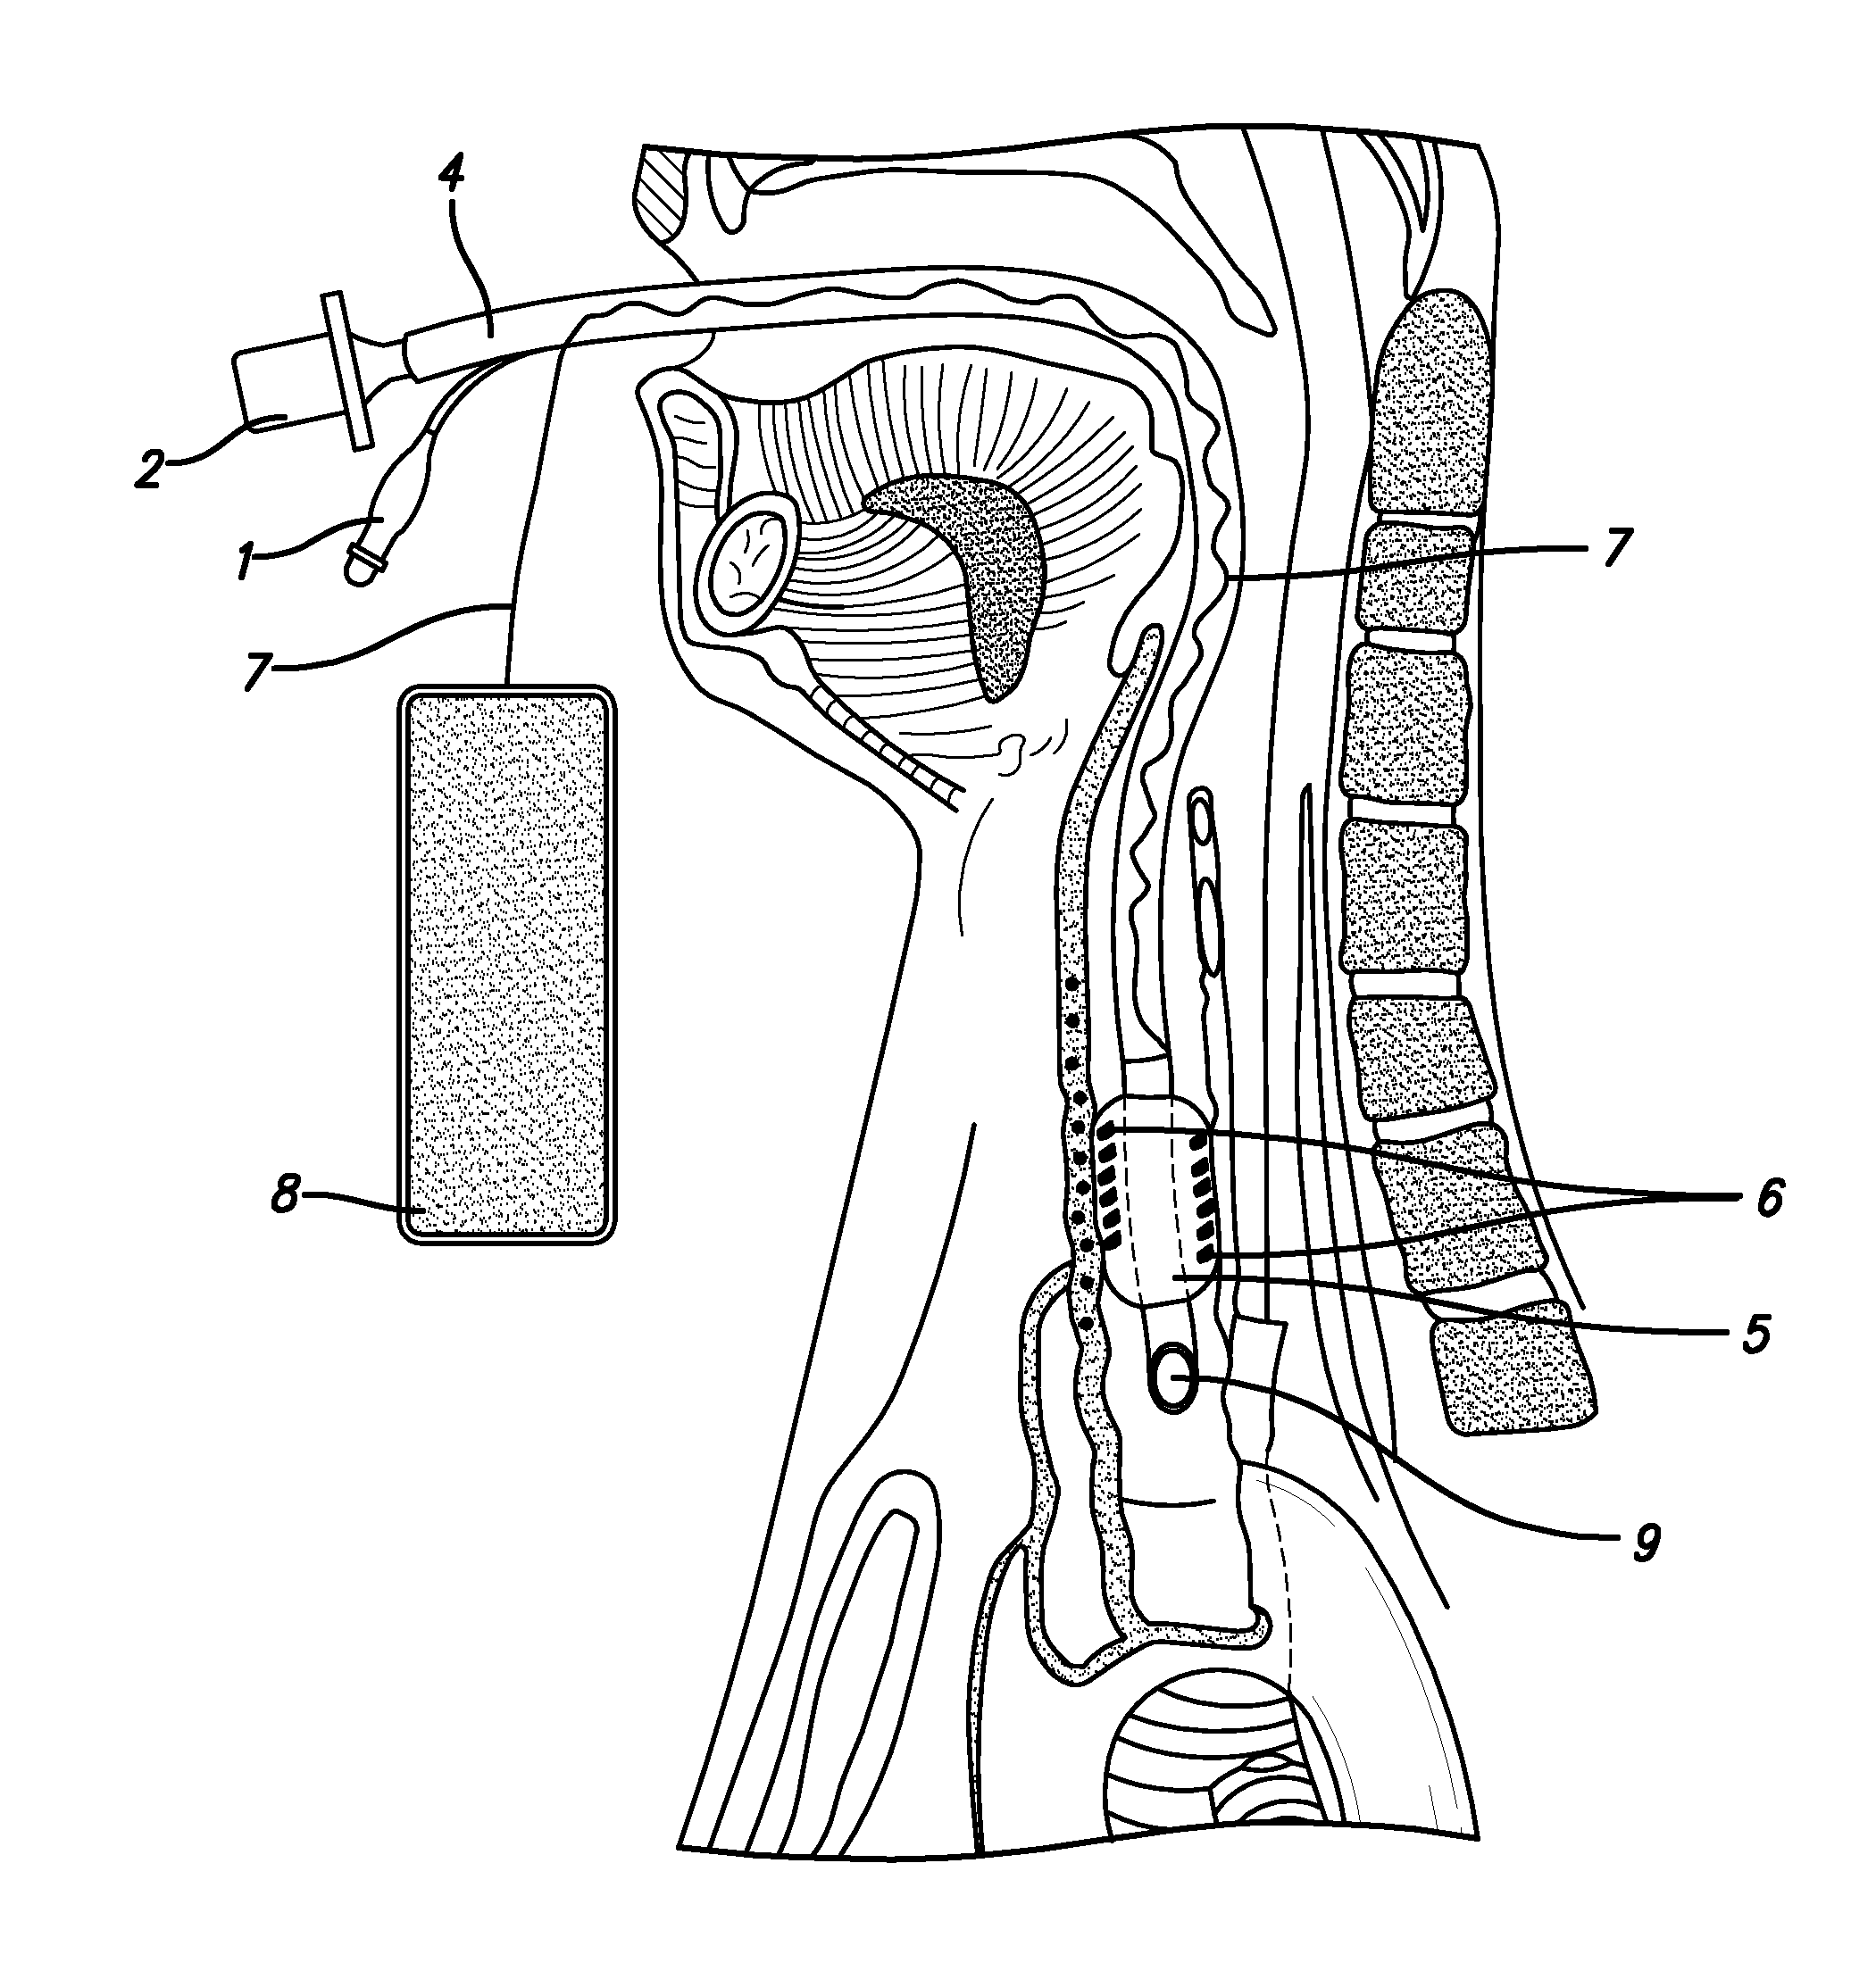 System and method for imaging endotracheal tube placement and measuring airway occlusion cuff pressure